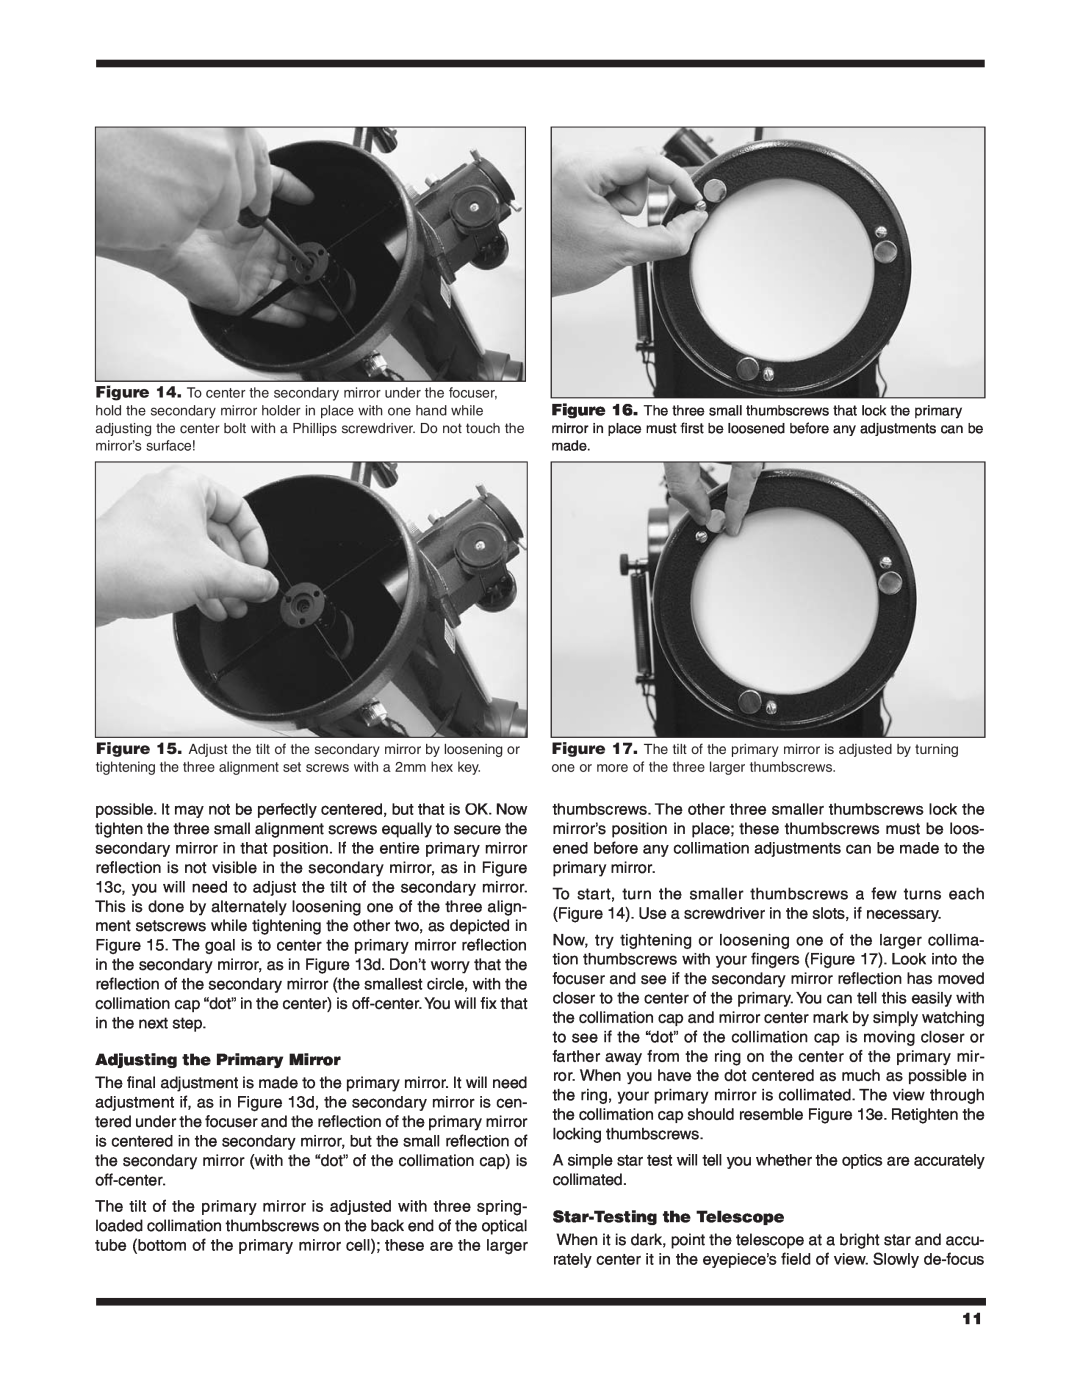 Orion XT10 CLASSIC, XT8 CLASSIC instruction manual Adjusting the Primary Mirror, Star-Testing the Telescope 